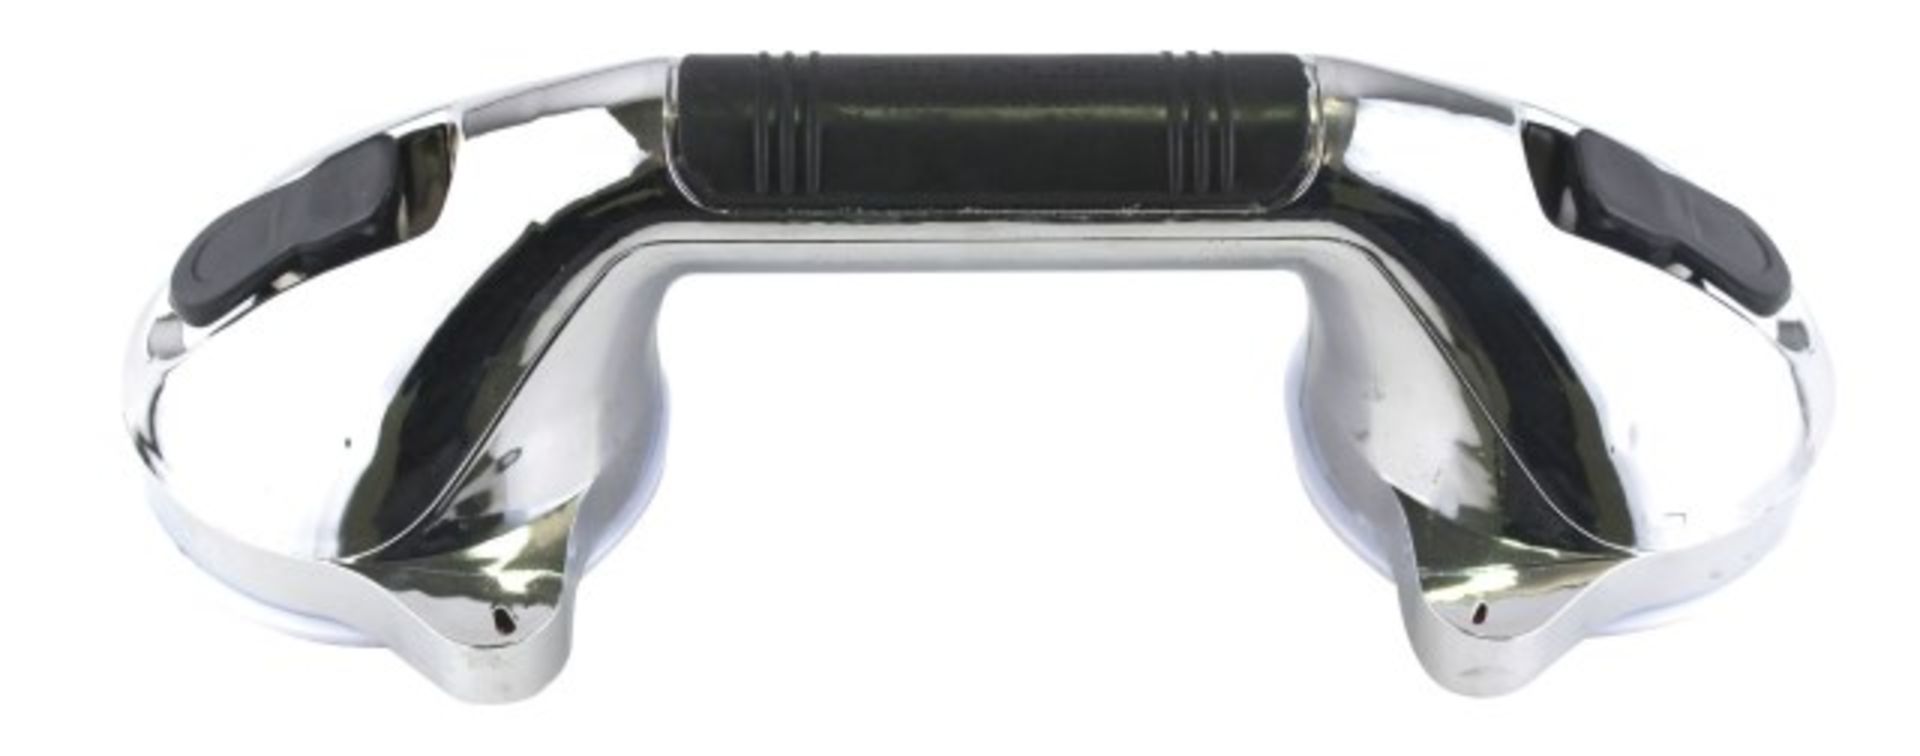 V Grade A Support Grip Handle With Indicators